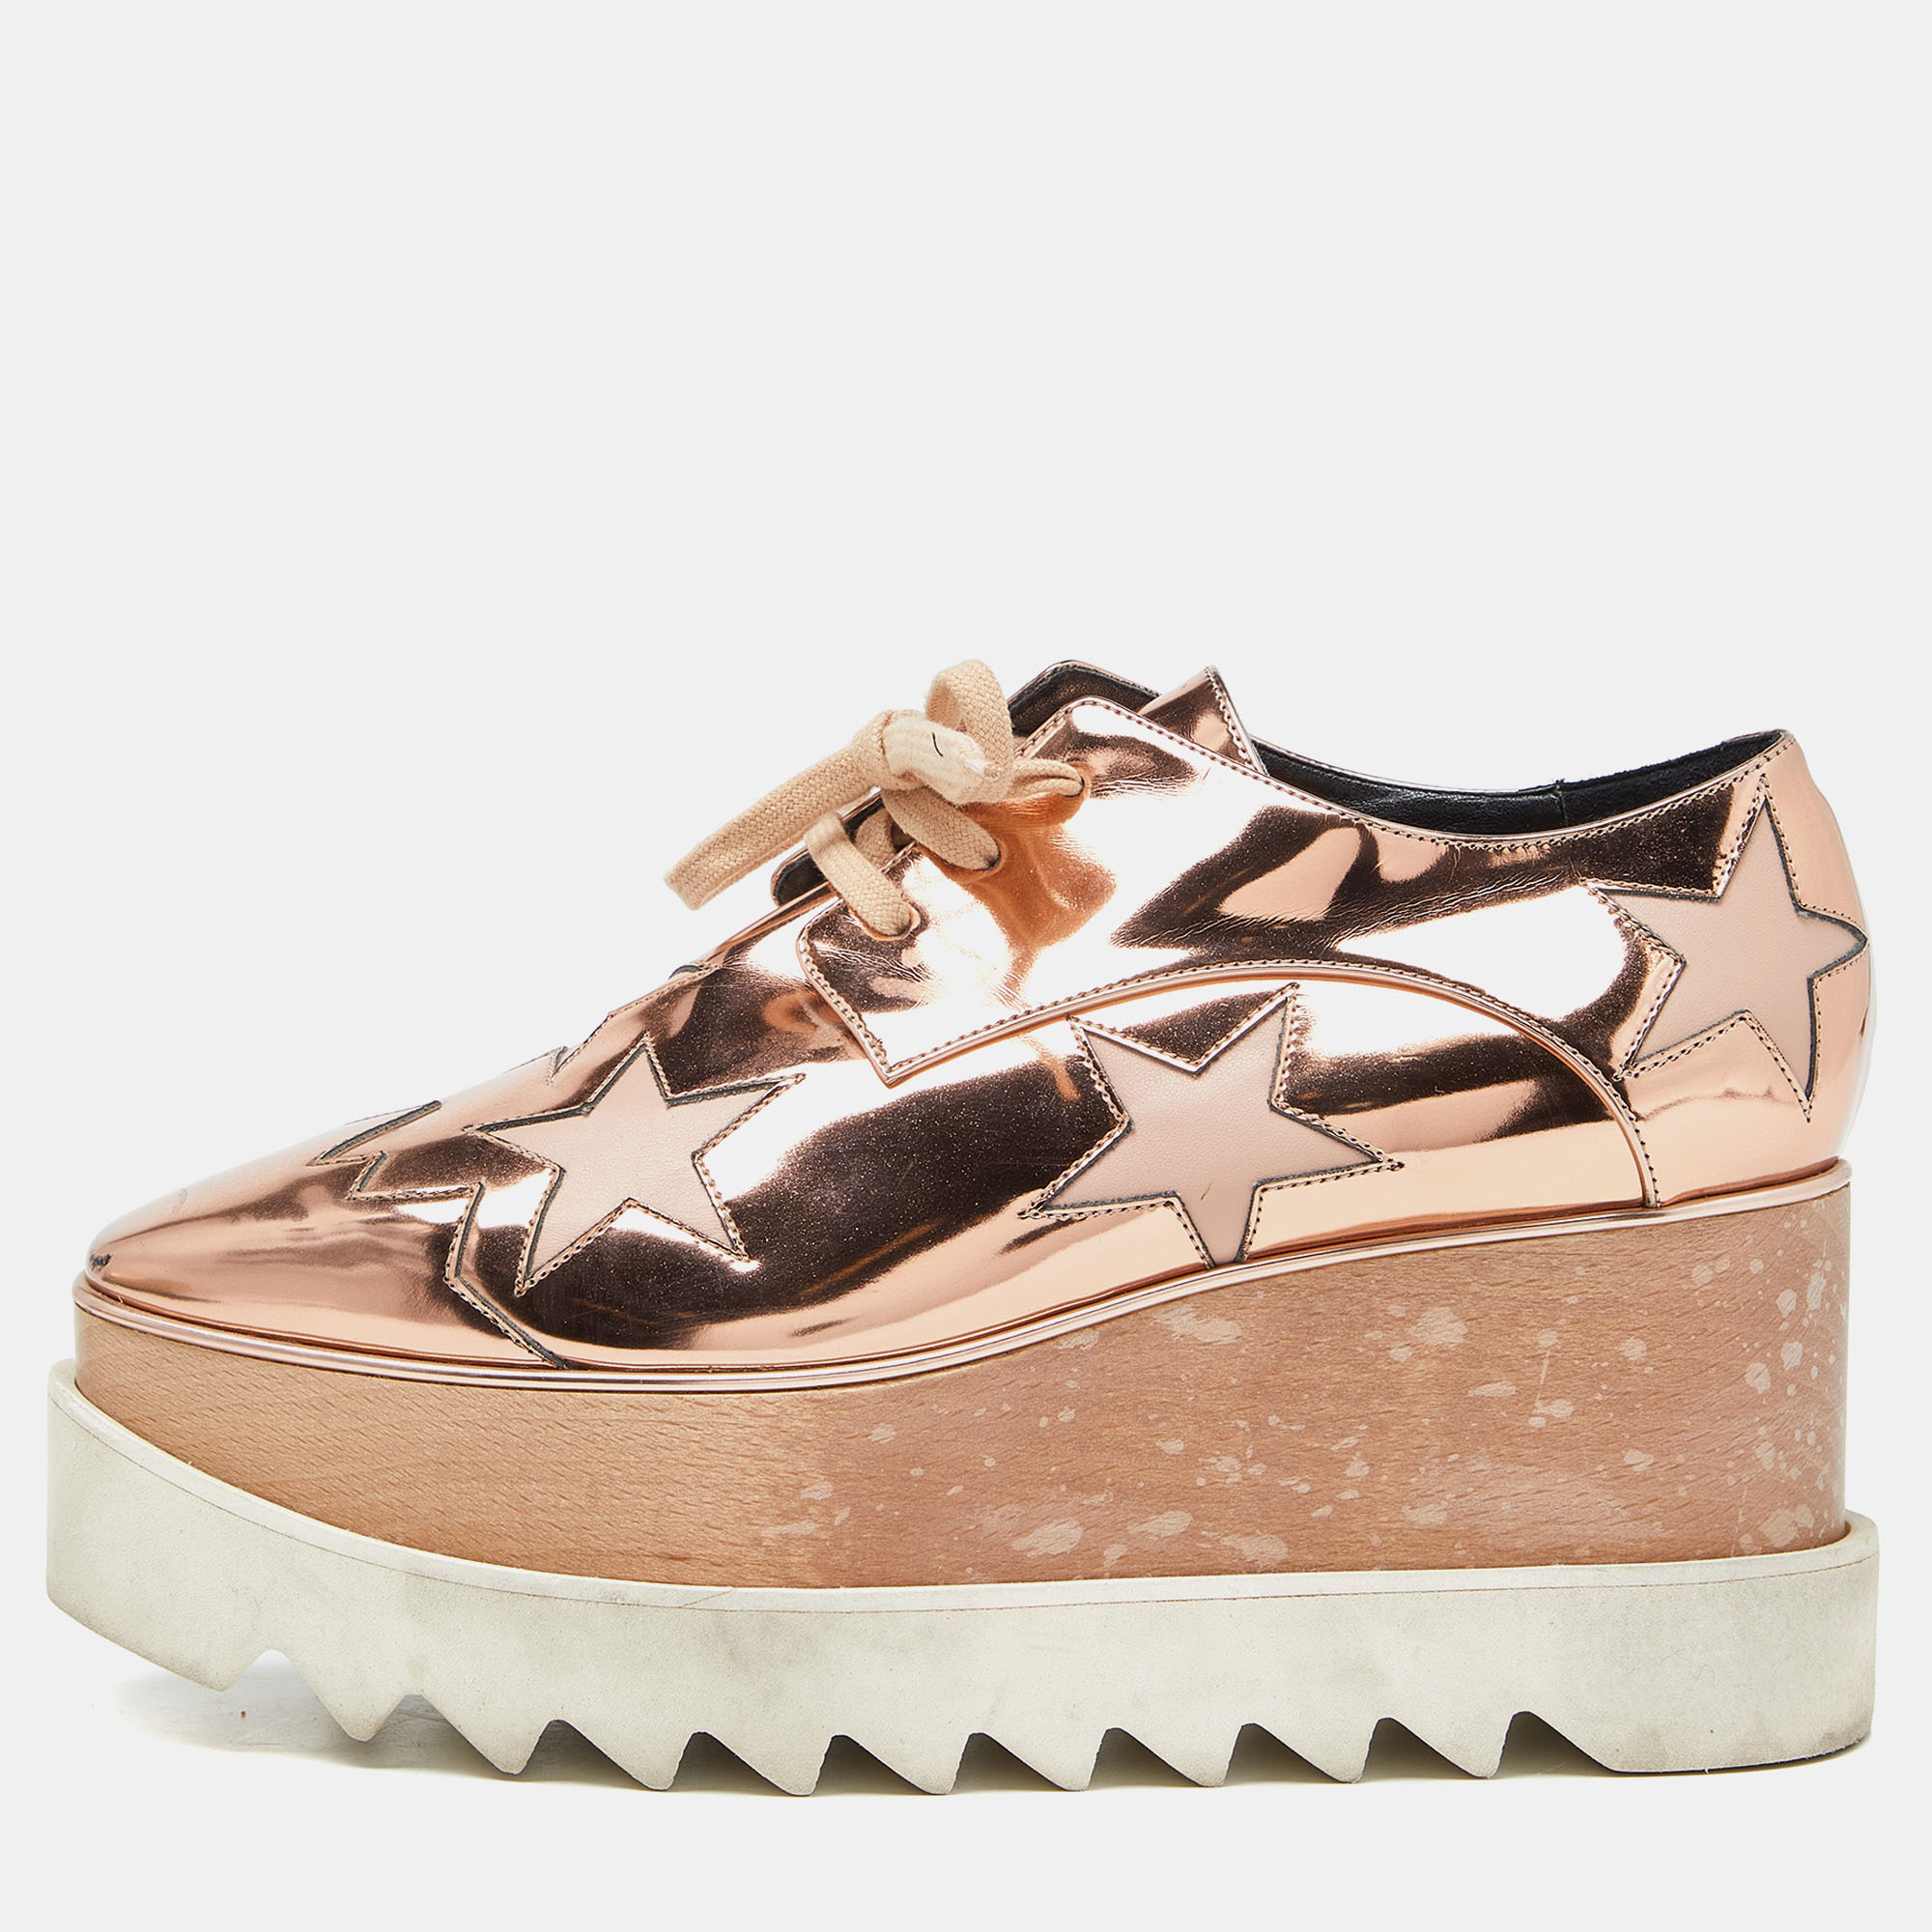 Pre-owned Stella Mccartney Metallic Rose Gold Faux Leather Elyse Platform Derby Sneakers Size 37